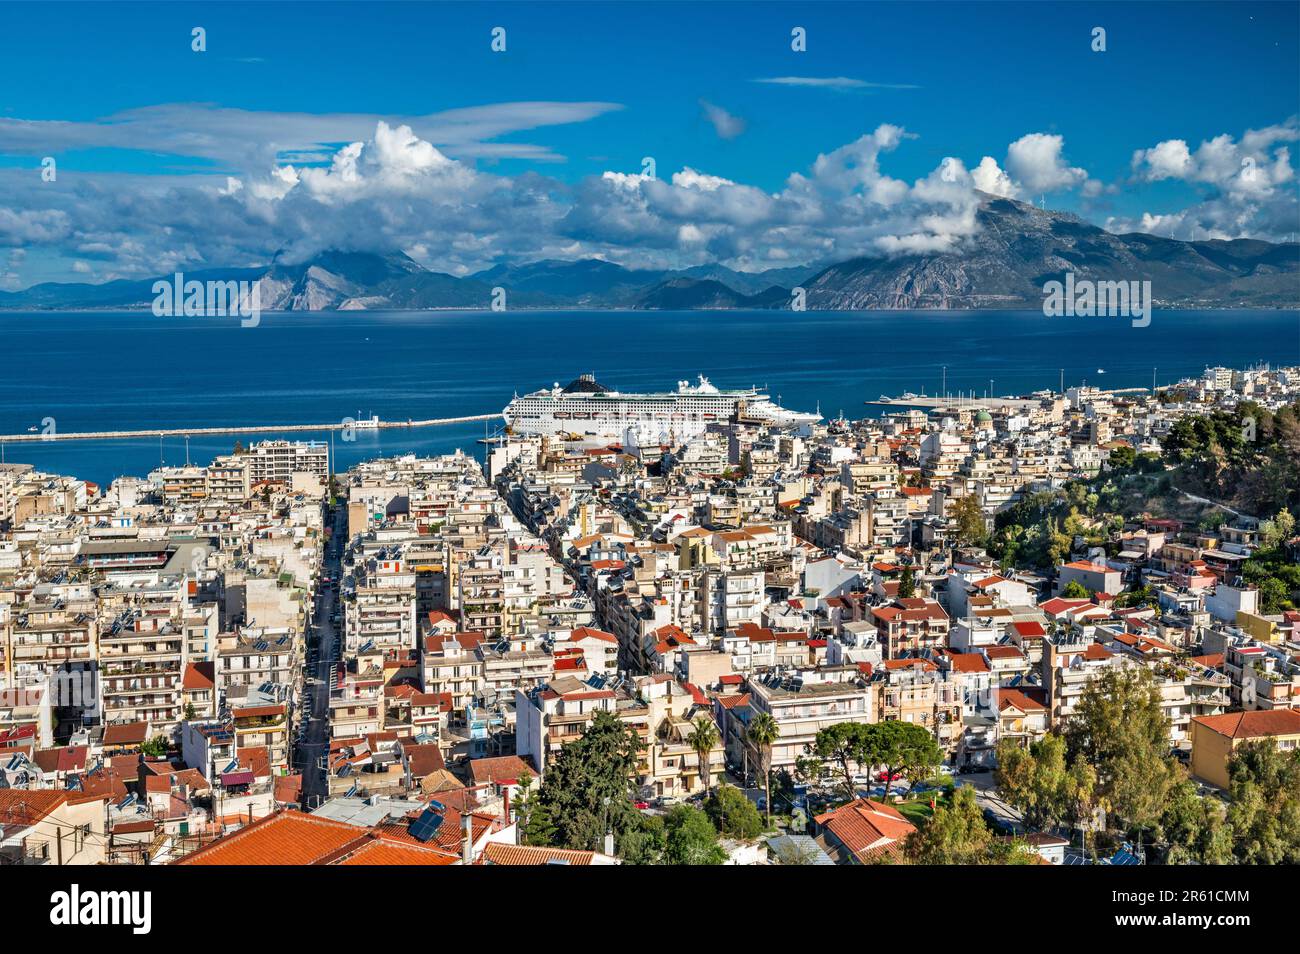 City of Patra, cruise ship at Gulf of Patra wharf, Arakynthos Mountains in distance, view from Patras Fortress (Kastro), Peloponnese peninsula, Greece Stock Photo